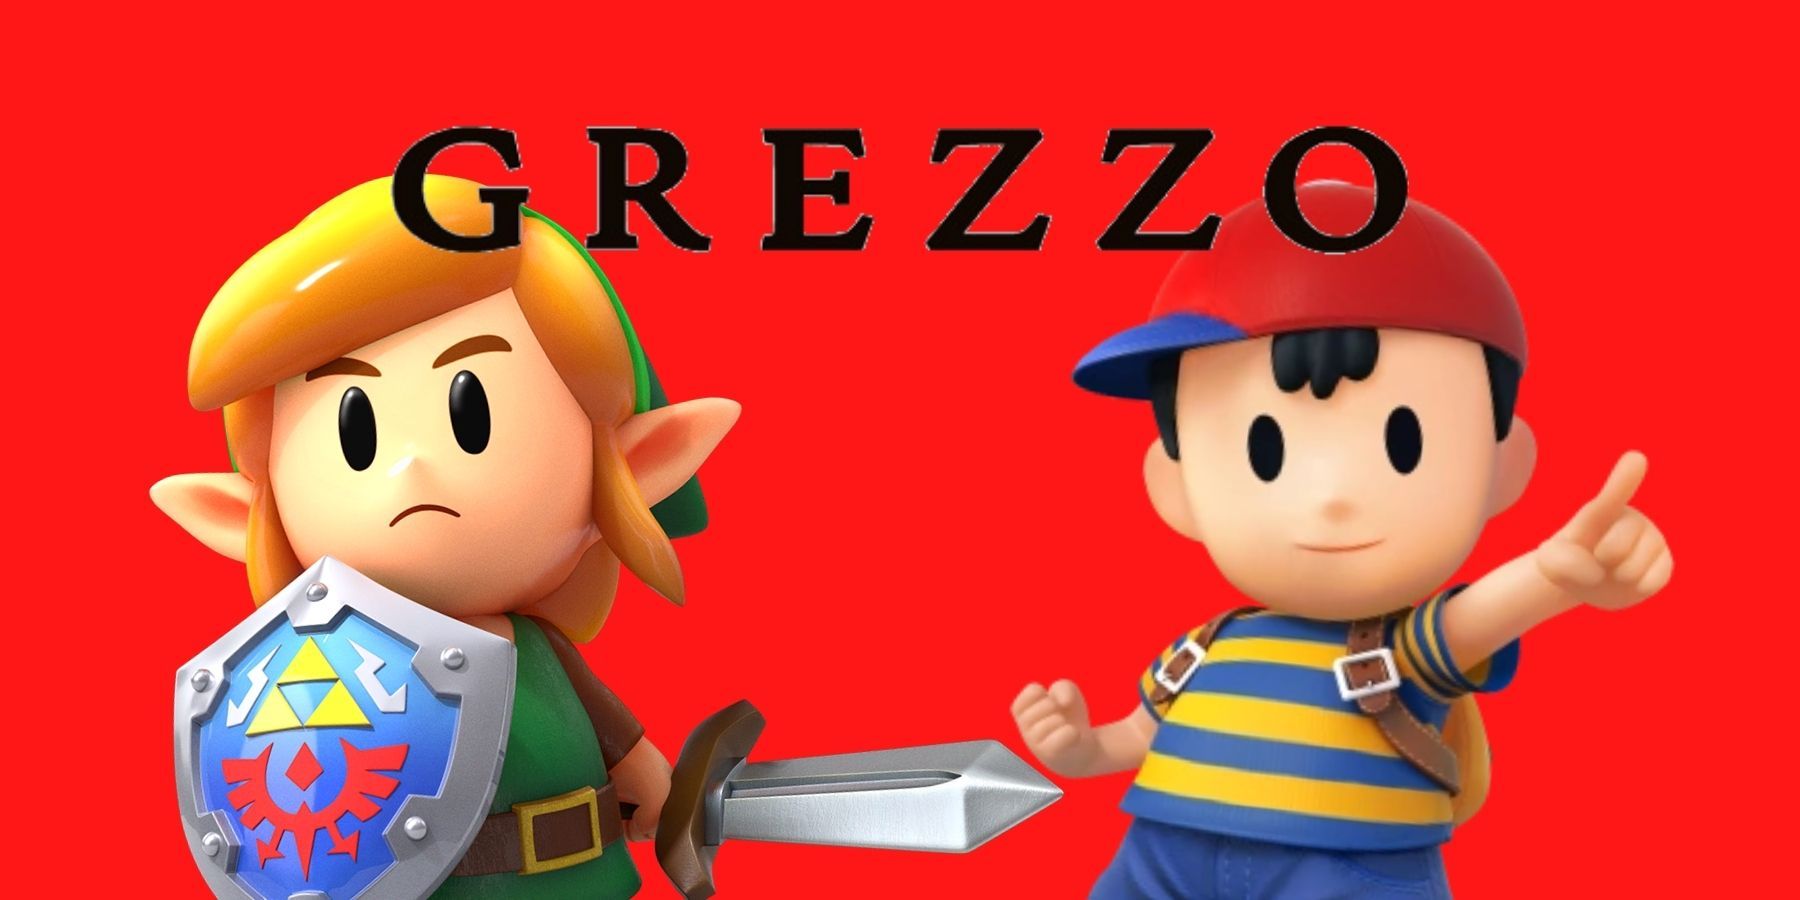 Predicting What Grezzos Rumored RPG Project Is